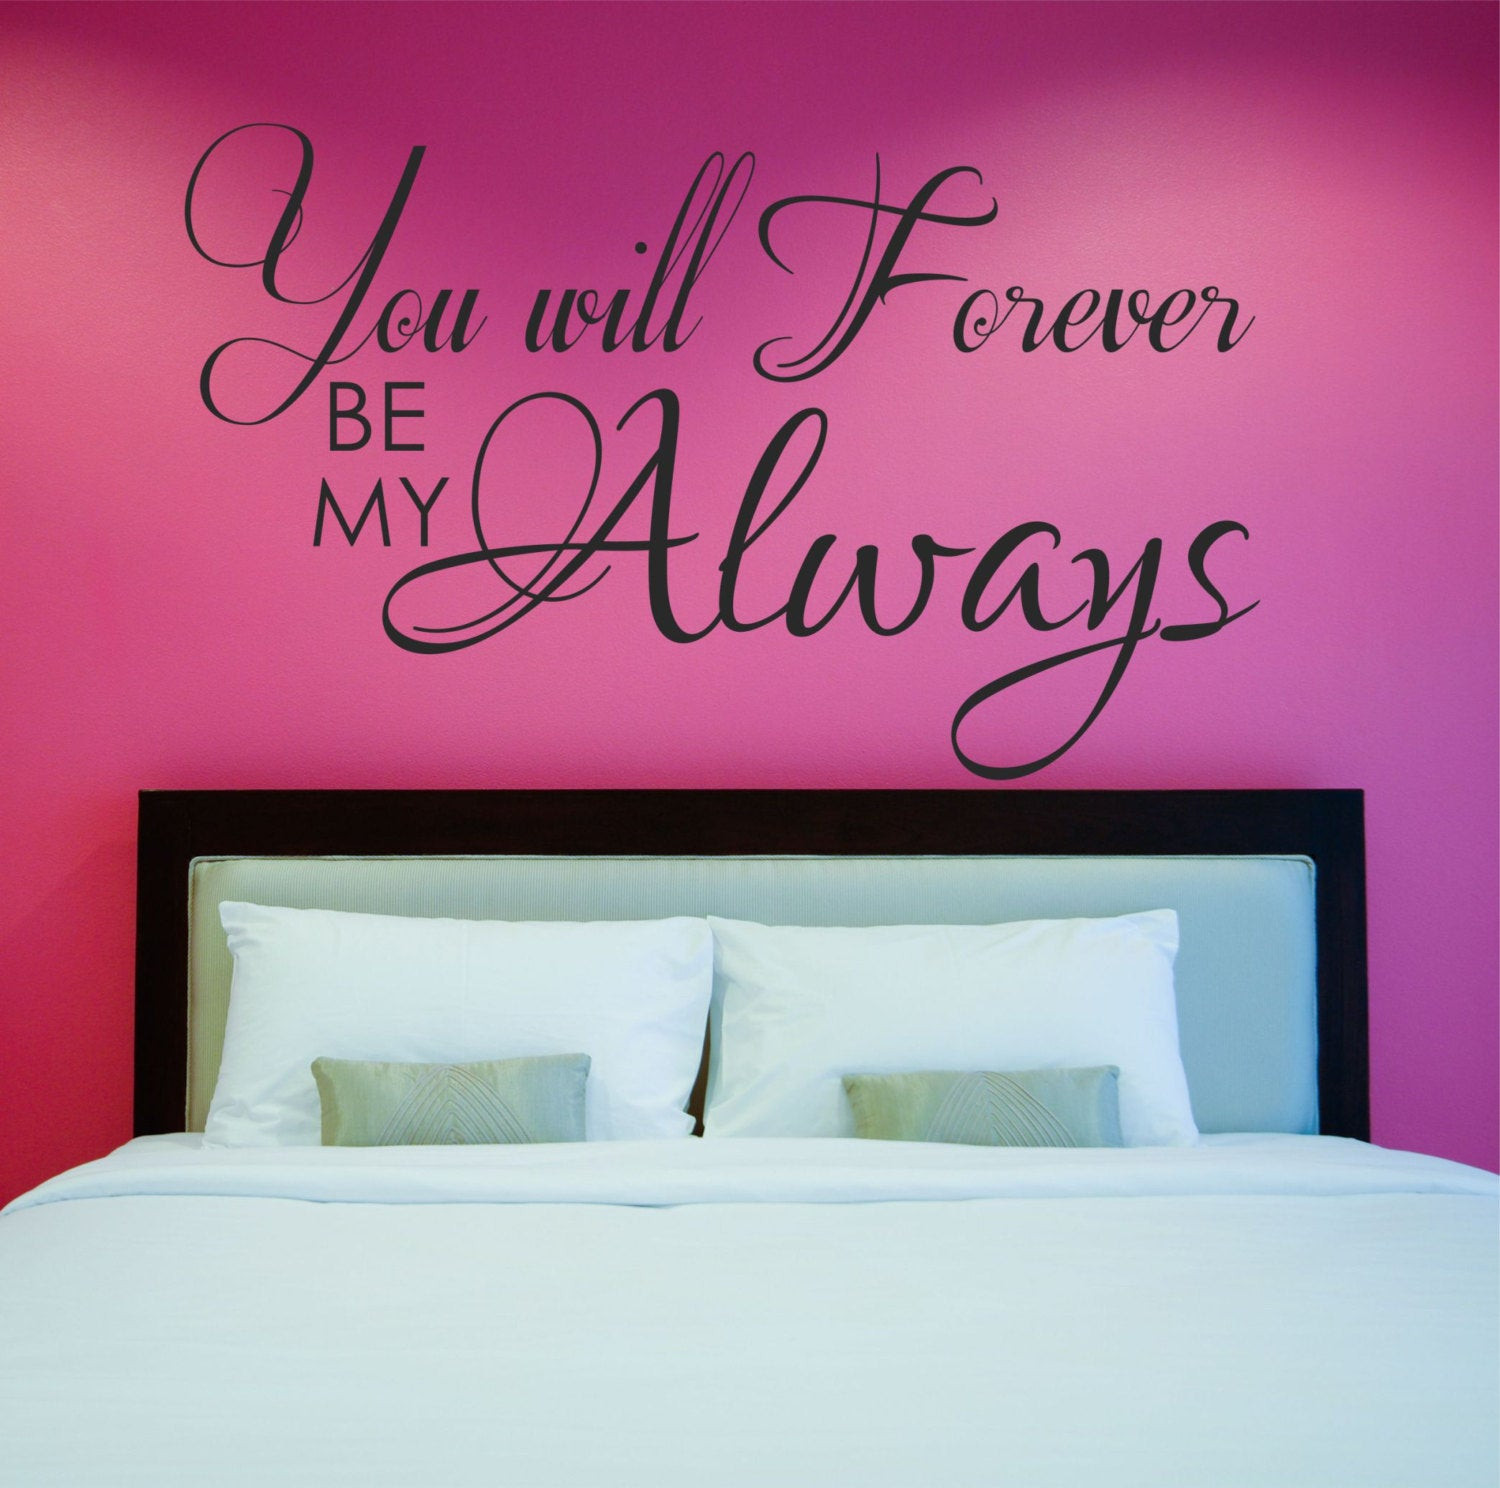 Wall Decals Quotes For Bedroom
 Love Quote Decal Master Bedroom Wall Decal Vinyl Wall Quote